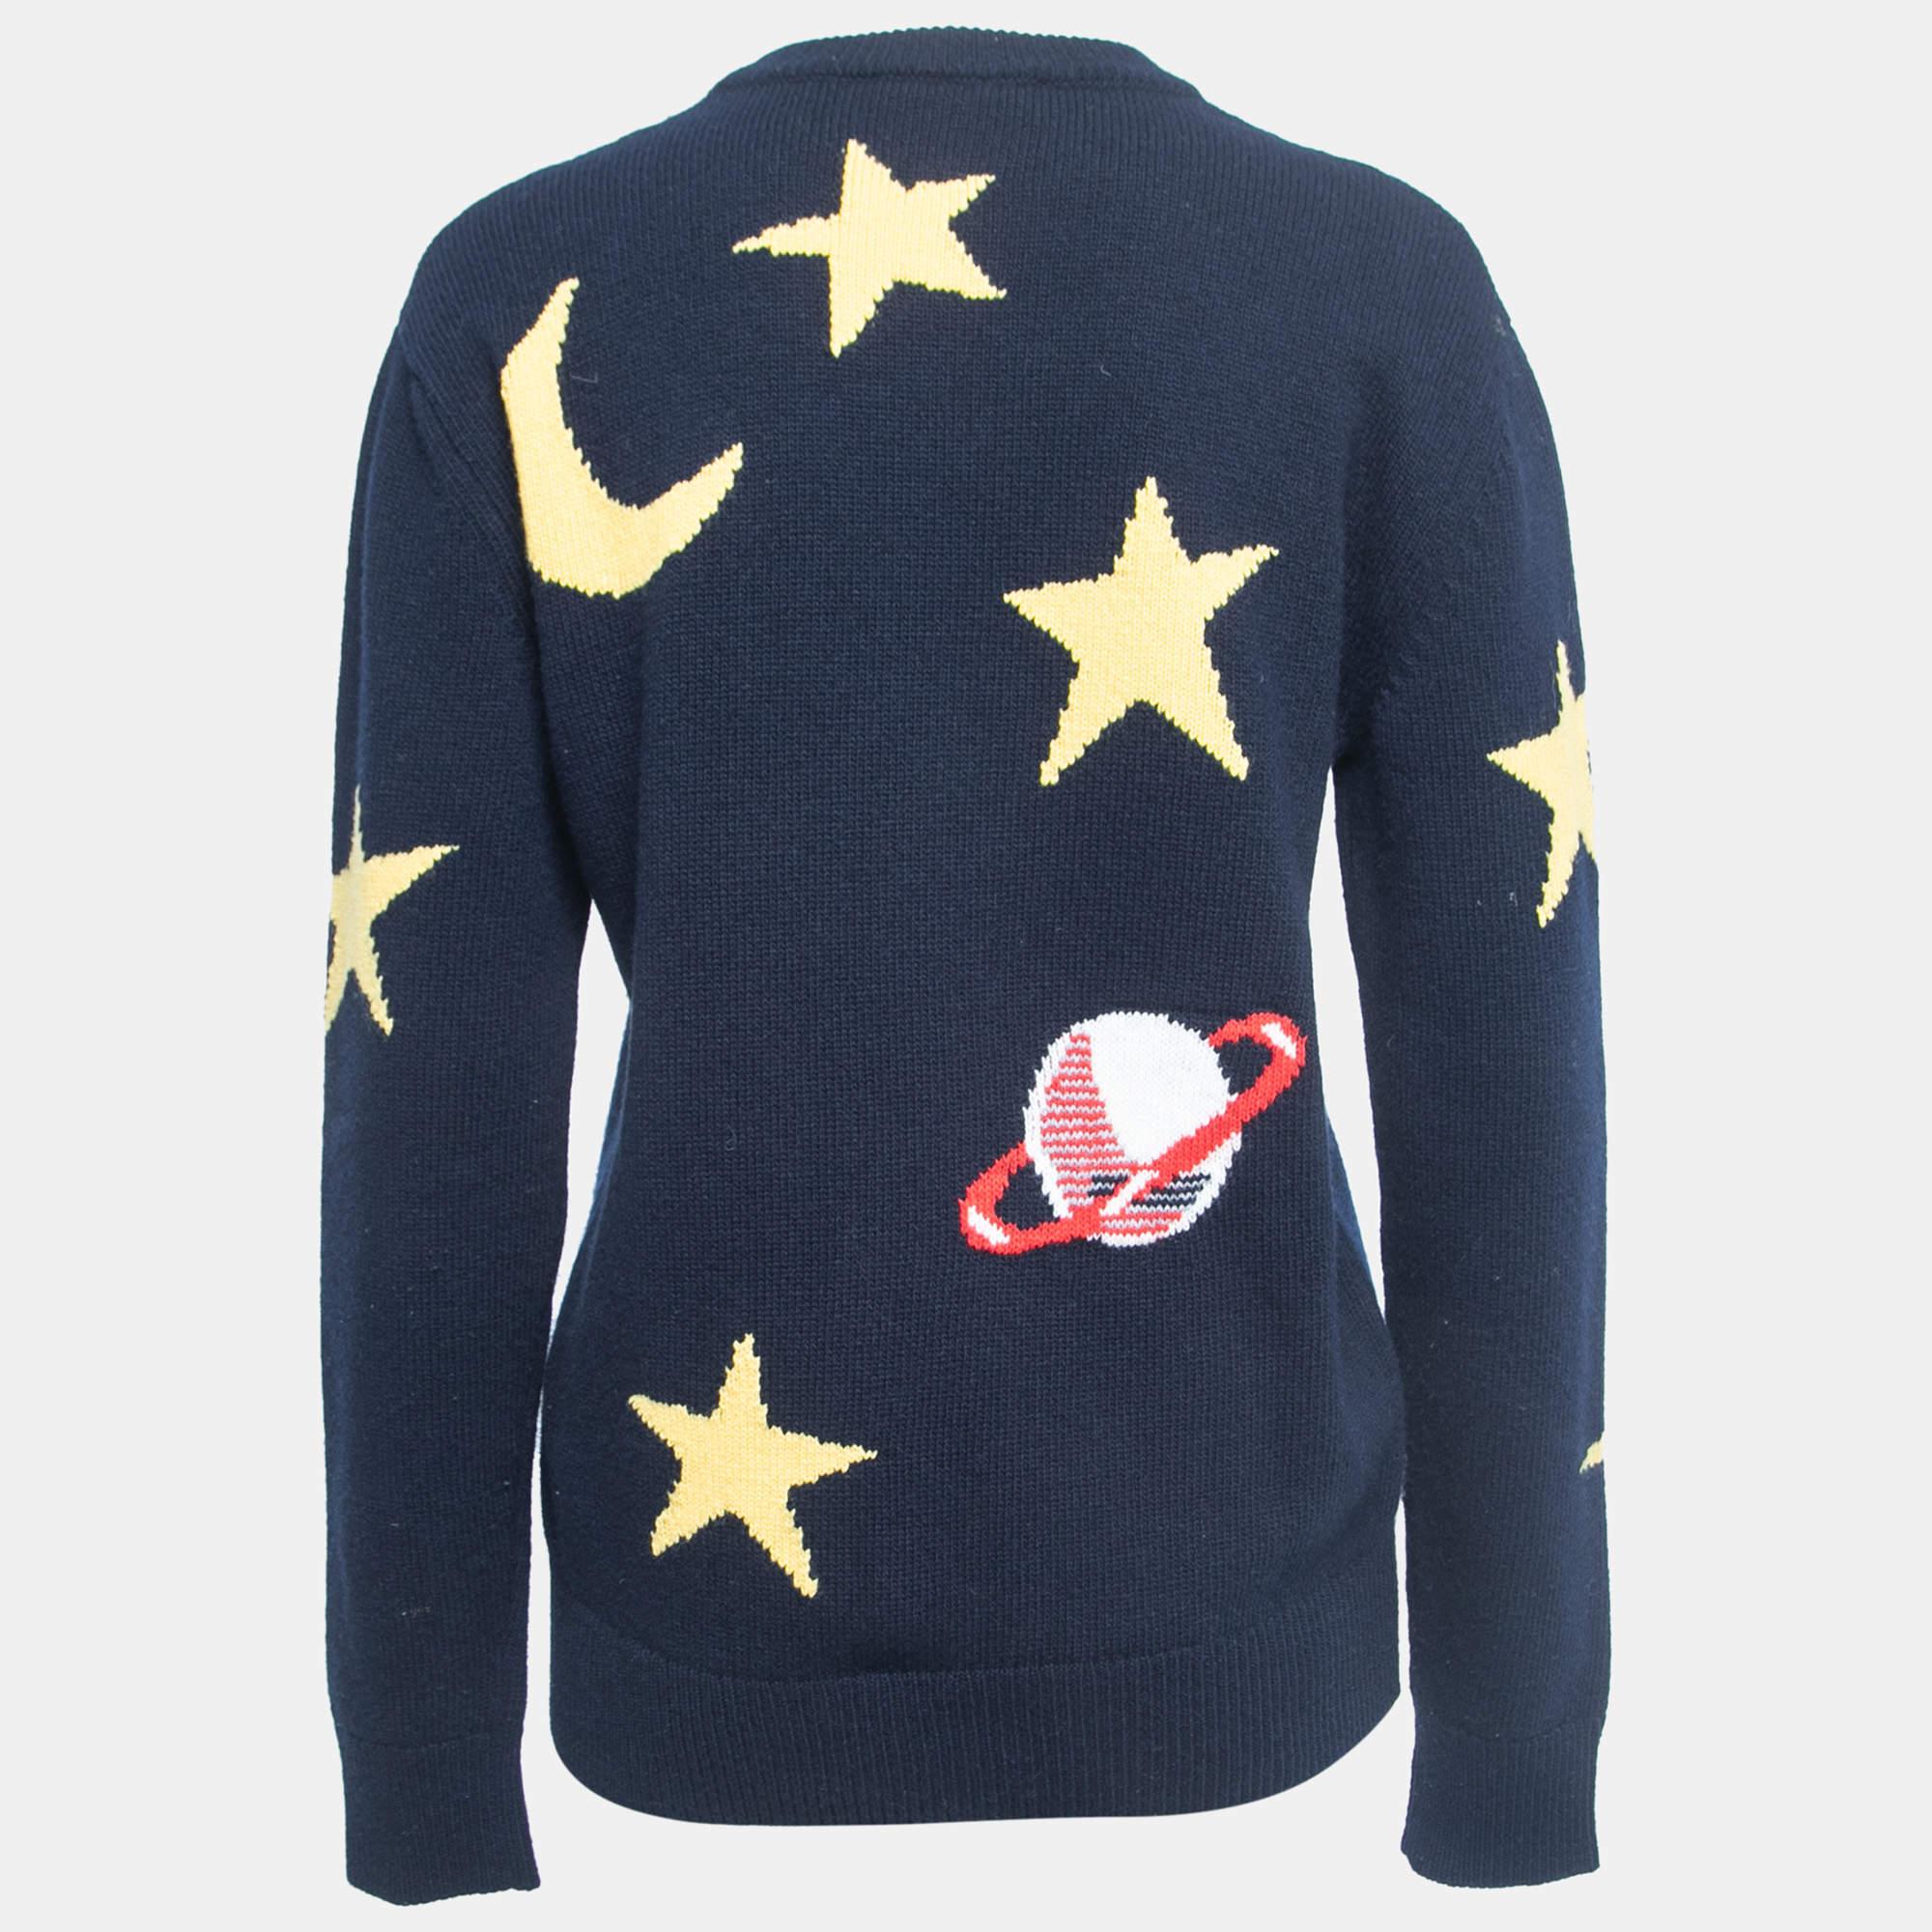 Dolce & Gabbana Navy Blue Spaceship Patterned Wool Sweater  In Excellent Condition For Sale In Dubai, Al Qouz 2